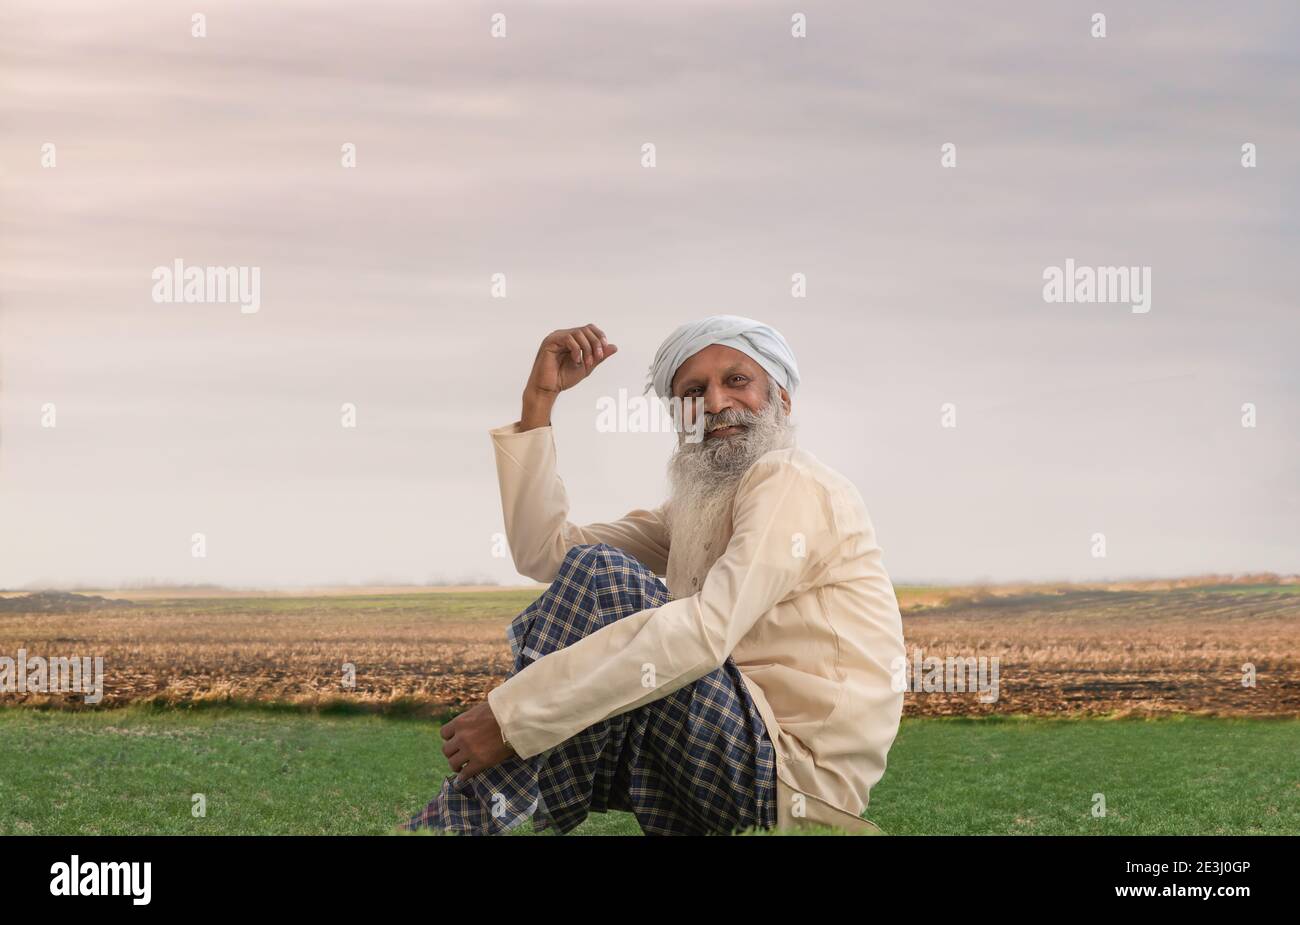 A HAPPY FARMER SITTING ON A FIELD AND LOOKING ABOVE Stock Photo